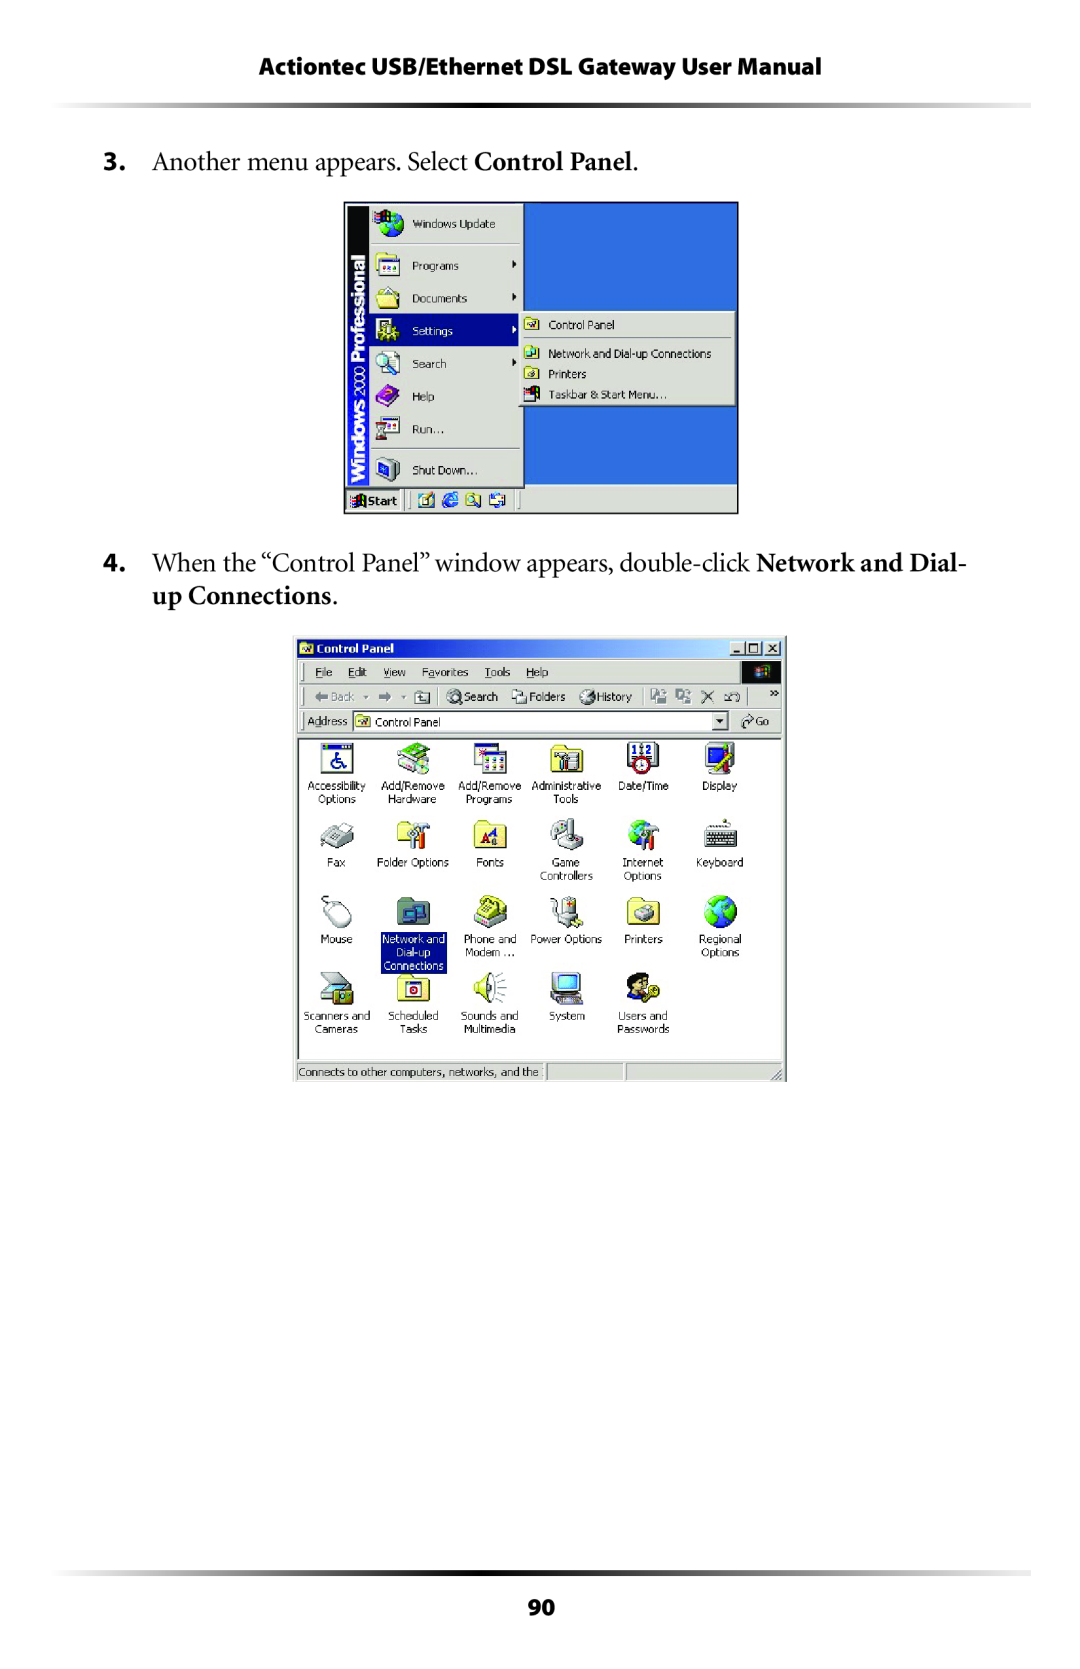 Gateway GT704 user manual Another menu appears. Select Control Panel, Actiontec USB/Ethernet DSL Gateway User Manual 